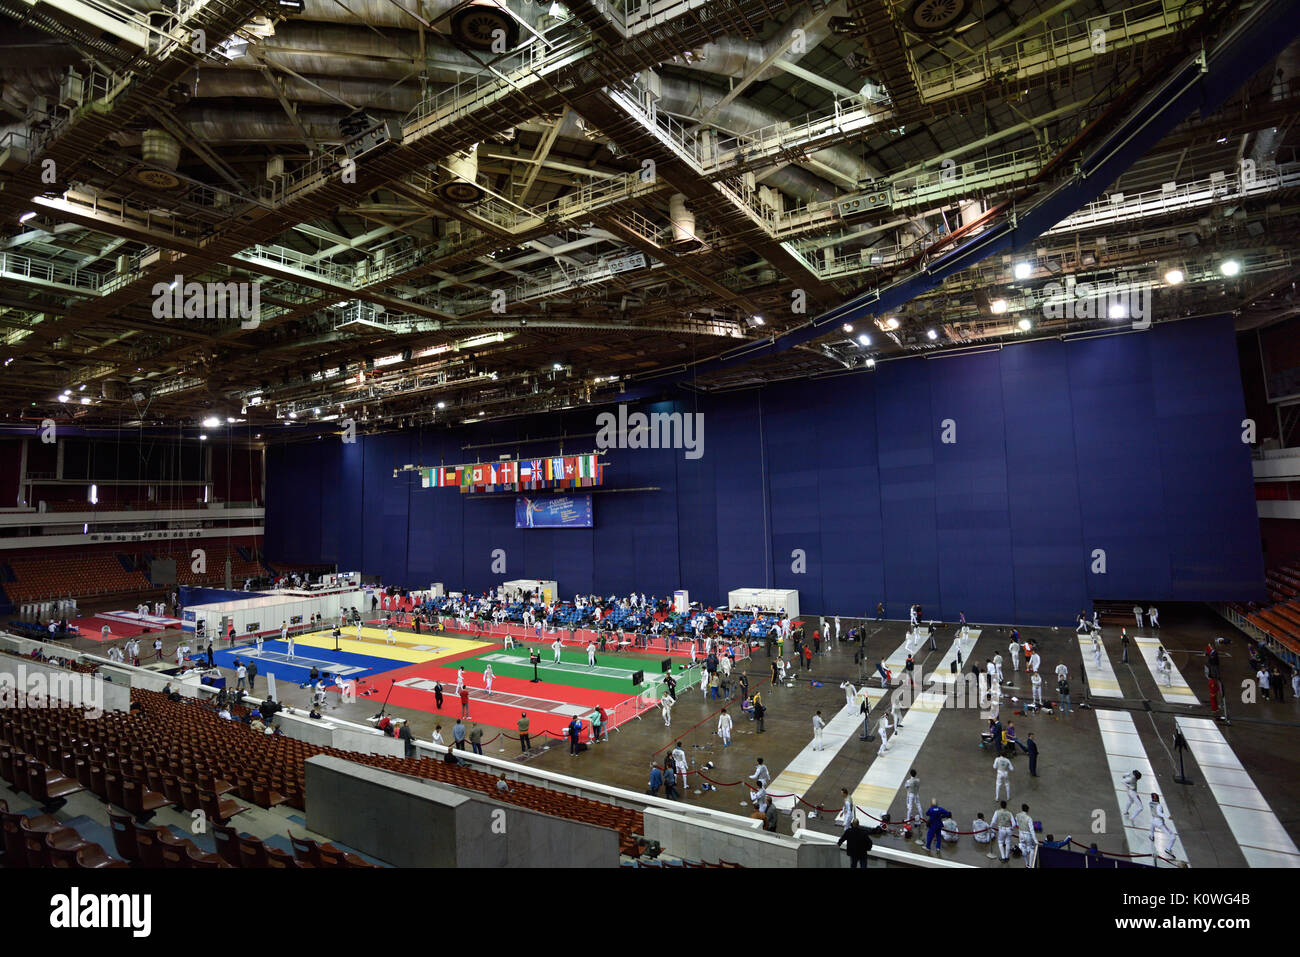 St. Petersburg, Russia - May 1, 2015: First day of competitions in 41th International fencing tournament St. Petersburg Foil. The tournament is the st Stock Photo